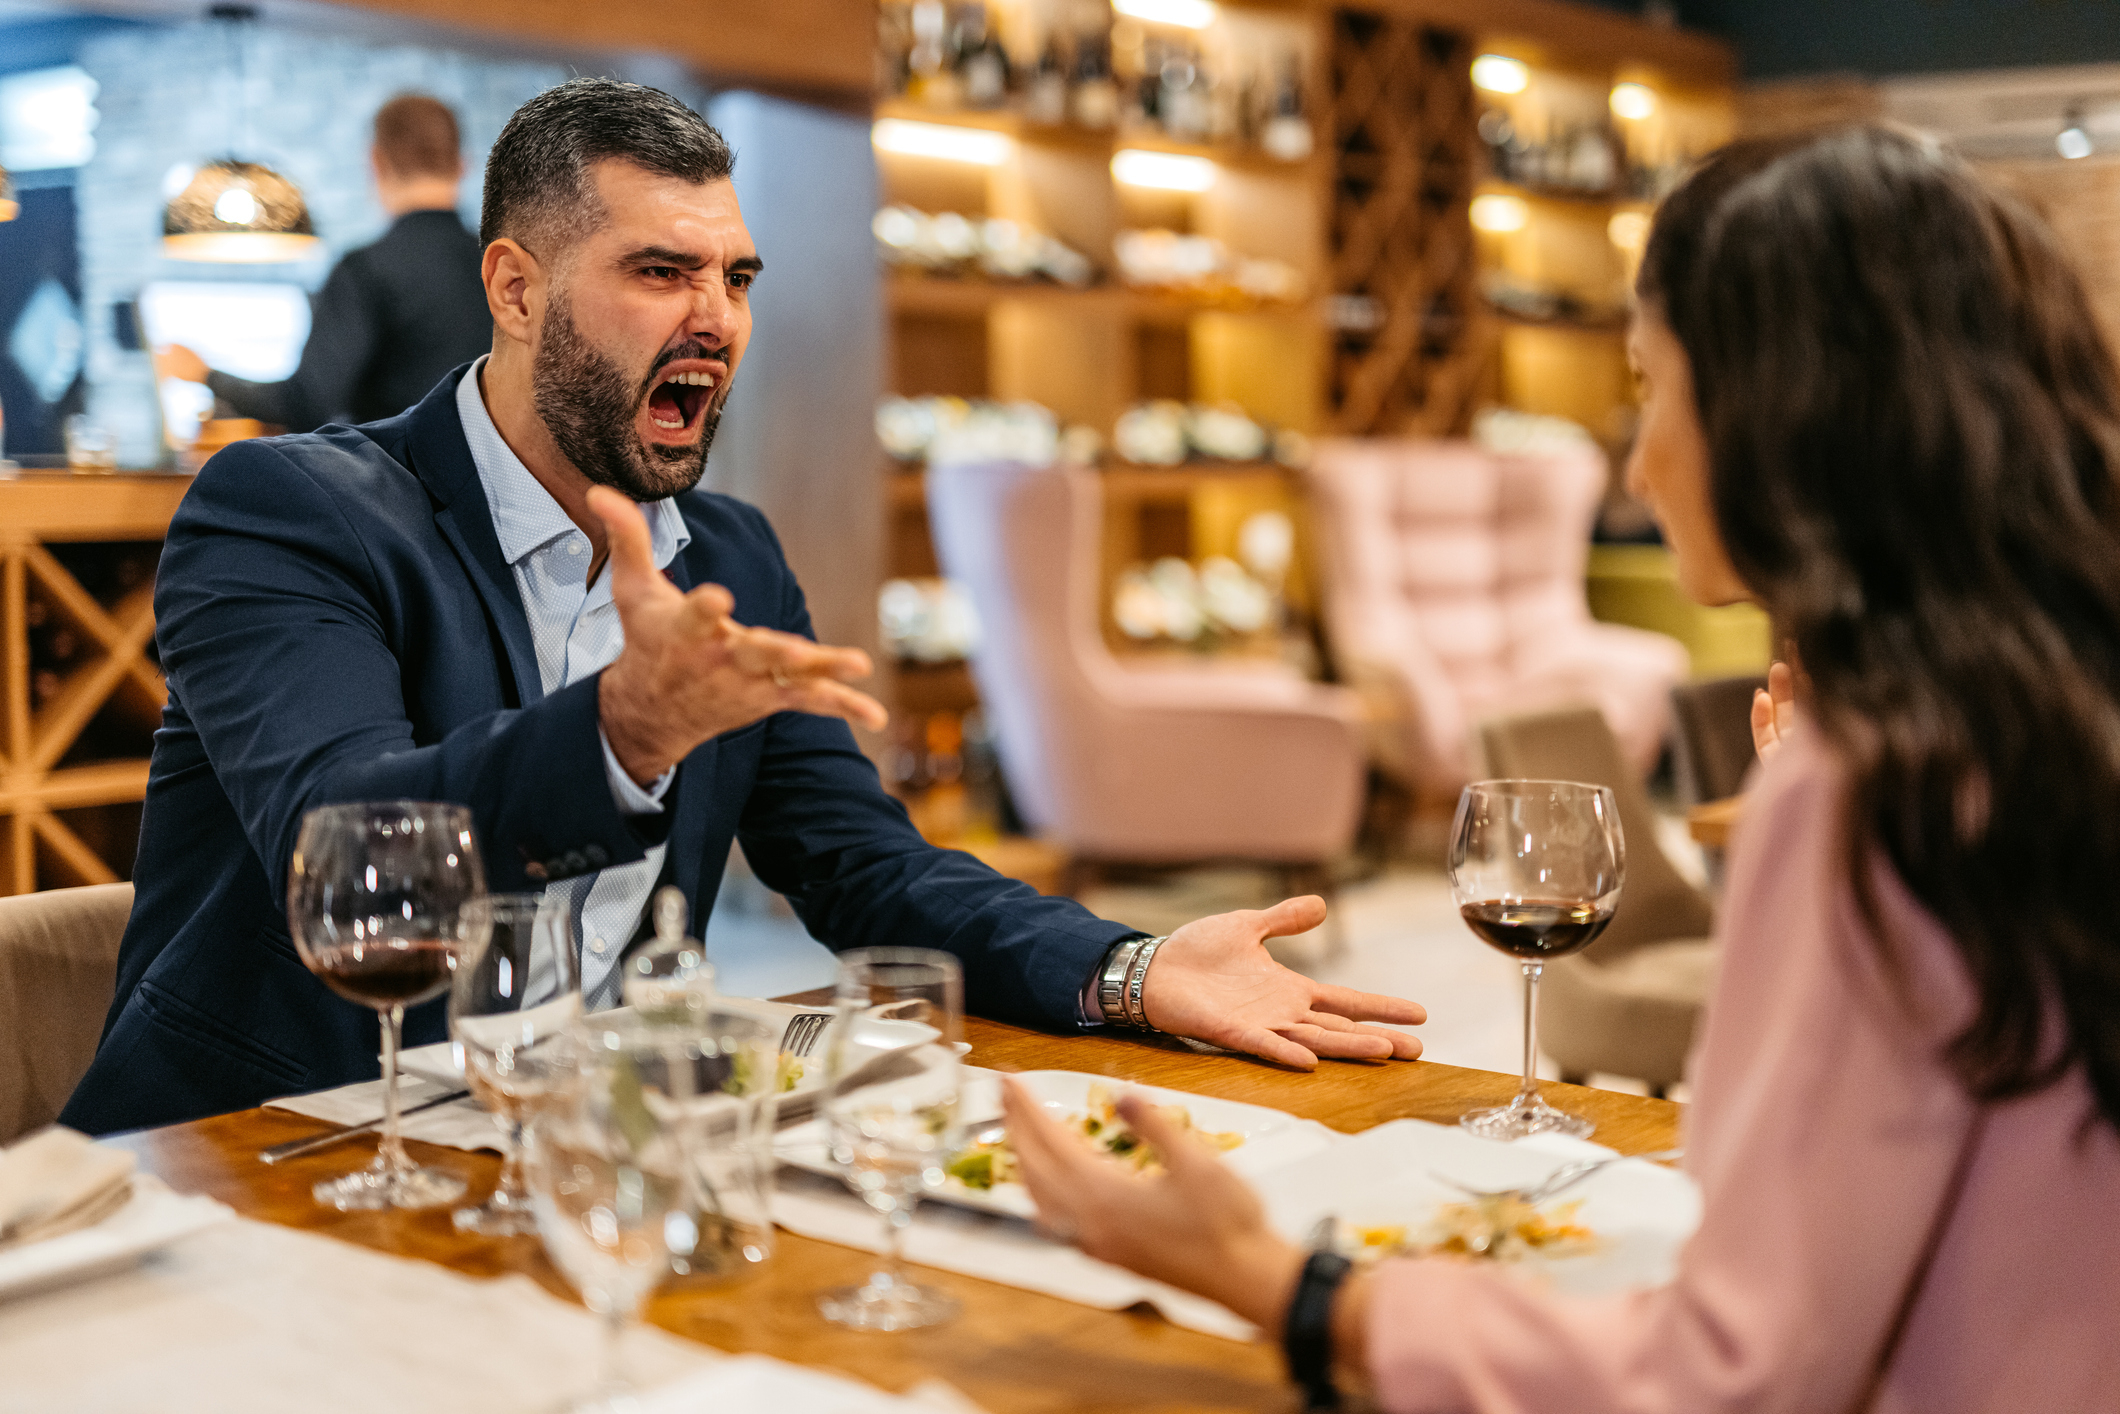 Man gesturing animatedly during a discussion with a woman at a restaurant table